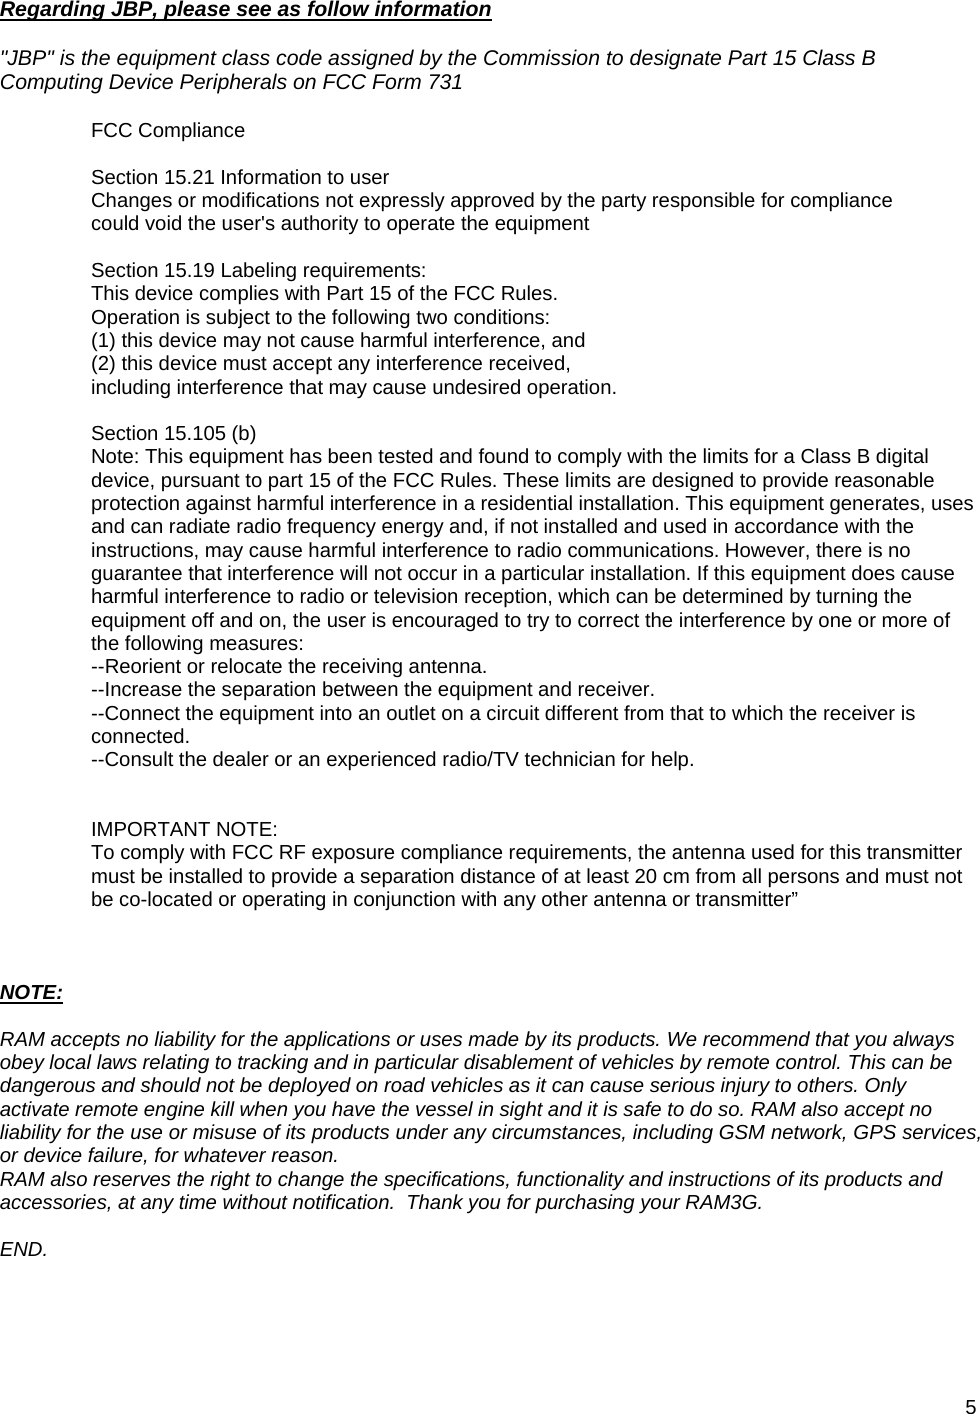 5  Regarding JBP, please see as follow information  &quot;JBP&quot; is the equipment class code assigned by the Commission to designate Part 15 Class B Computing Device Peripherals on FCC Form 731  FCC Compliance  Section 15.21 Information to user Changes or modifications not expressly approved by the party responsible for compliance could void the user&apos;s authority to operate the equipment  Section 15.19 Labeling requirements: This device complies with Part 15 of the FCC Rules.  Operation is subject to the following two conditions:  (1) this device may not cause harmful interference, and  (2) this device must accept any interference received,  including interference that may cause undesired operation.  Section 15.105 (b) Note: This equipment has been tested and found to comply with the limits for a Class B digital device, pursuant to part 15 of the FCC Rules. These limits are designed to provide reasonable protection against harmful interference in a residential installation. This equipment generates, uses and can radiate radio frequency energy and, if not installed and used in accordance with the instructions, may cause harmful interference to radio communications. However, there is no guarantee that interference will not occur in a particular installation. If this equipment does cause harmful interference to radio or television reception, which can be determined by turning the equipment off and on, the user is encouraged to try to correct the interference by one or more of the following measures: --Reorient or relocate the receiving antenna. --Increase the separation between the equipment and receiver. --Connect the equipment into an outlet on a circuit different from that to which the receiver is connected. --Consult the dealer or an experienced radio/TV technician for help.   IMPORTANT NOTE: To comply with FCC RF exposure compliance requirements, the antenna used for this transmitter must be installed to provide a separation distance of at least 20 cm from all persons and must not be co-located or operating in conjunction with any other antenna or transmitter”    NOTE:  RAM accepts no liability for the applications or uses made by its products. We recommend that you always obey local laws relating to tracking and in particular disablement of vehicles by remote control. This can be dangerous and should not be deployed on road vehicles as it can cause serious injury to others. Only activate remote engine kill when you have the vessel in sight and it is safe to do so. RAM also accept no liability for the use or misuse of its products under any circumstances, including GSM network, GPS services, or device failure, for whatever reason. RAM also reserves the right to change the specifications, functionality and instructions of its products and accessories, at any time without notification.  Thank you for purchasing your RAM3G.  END. 